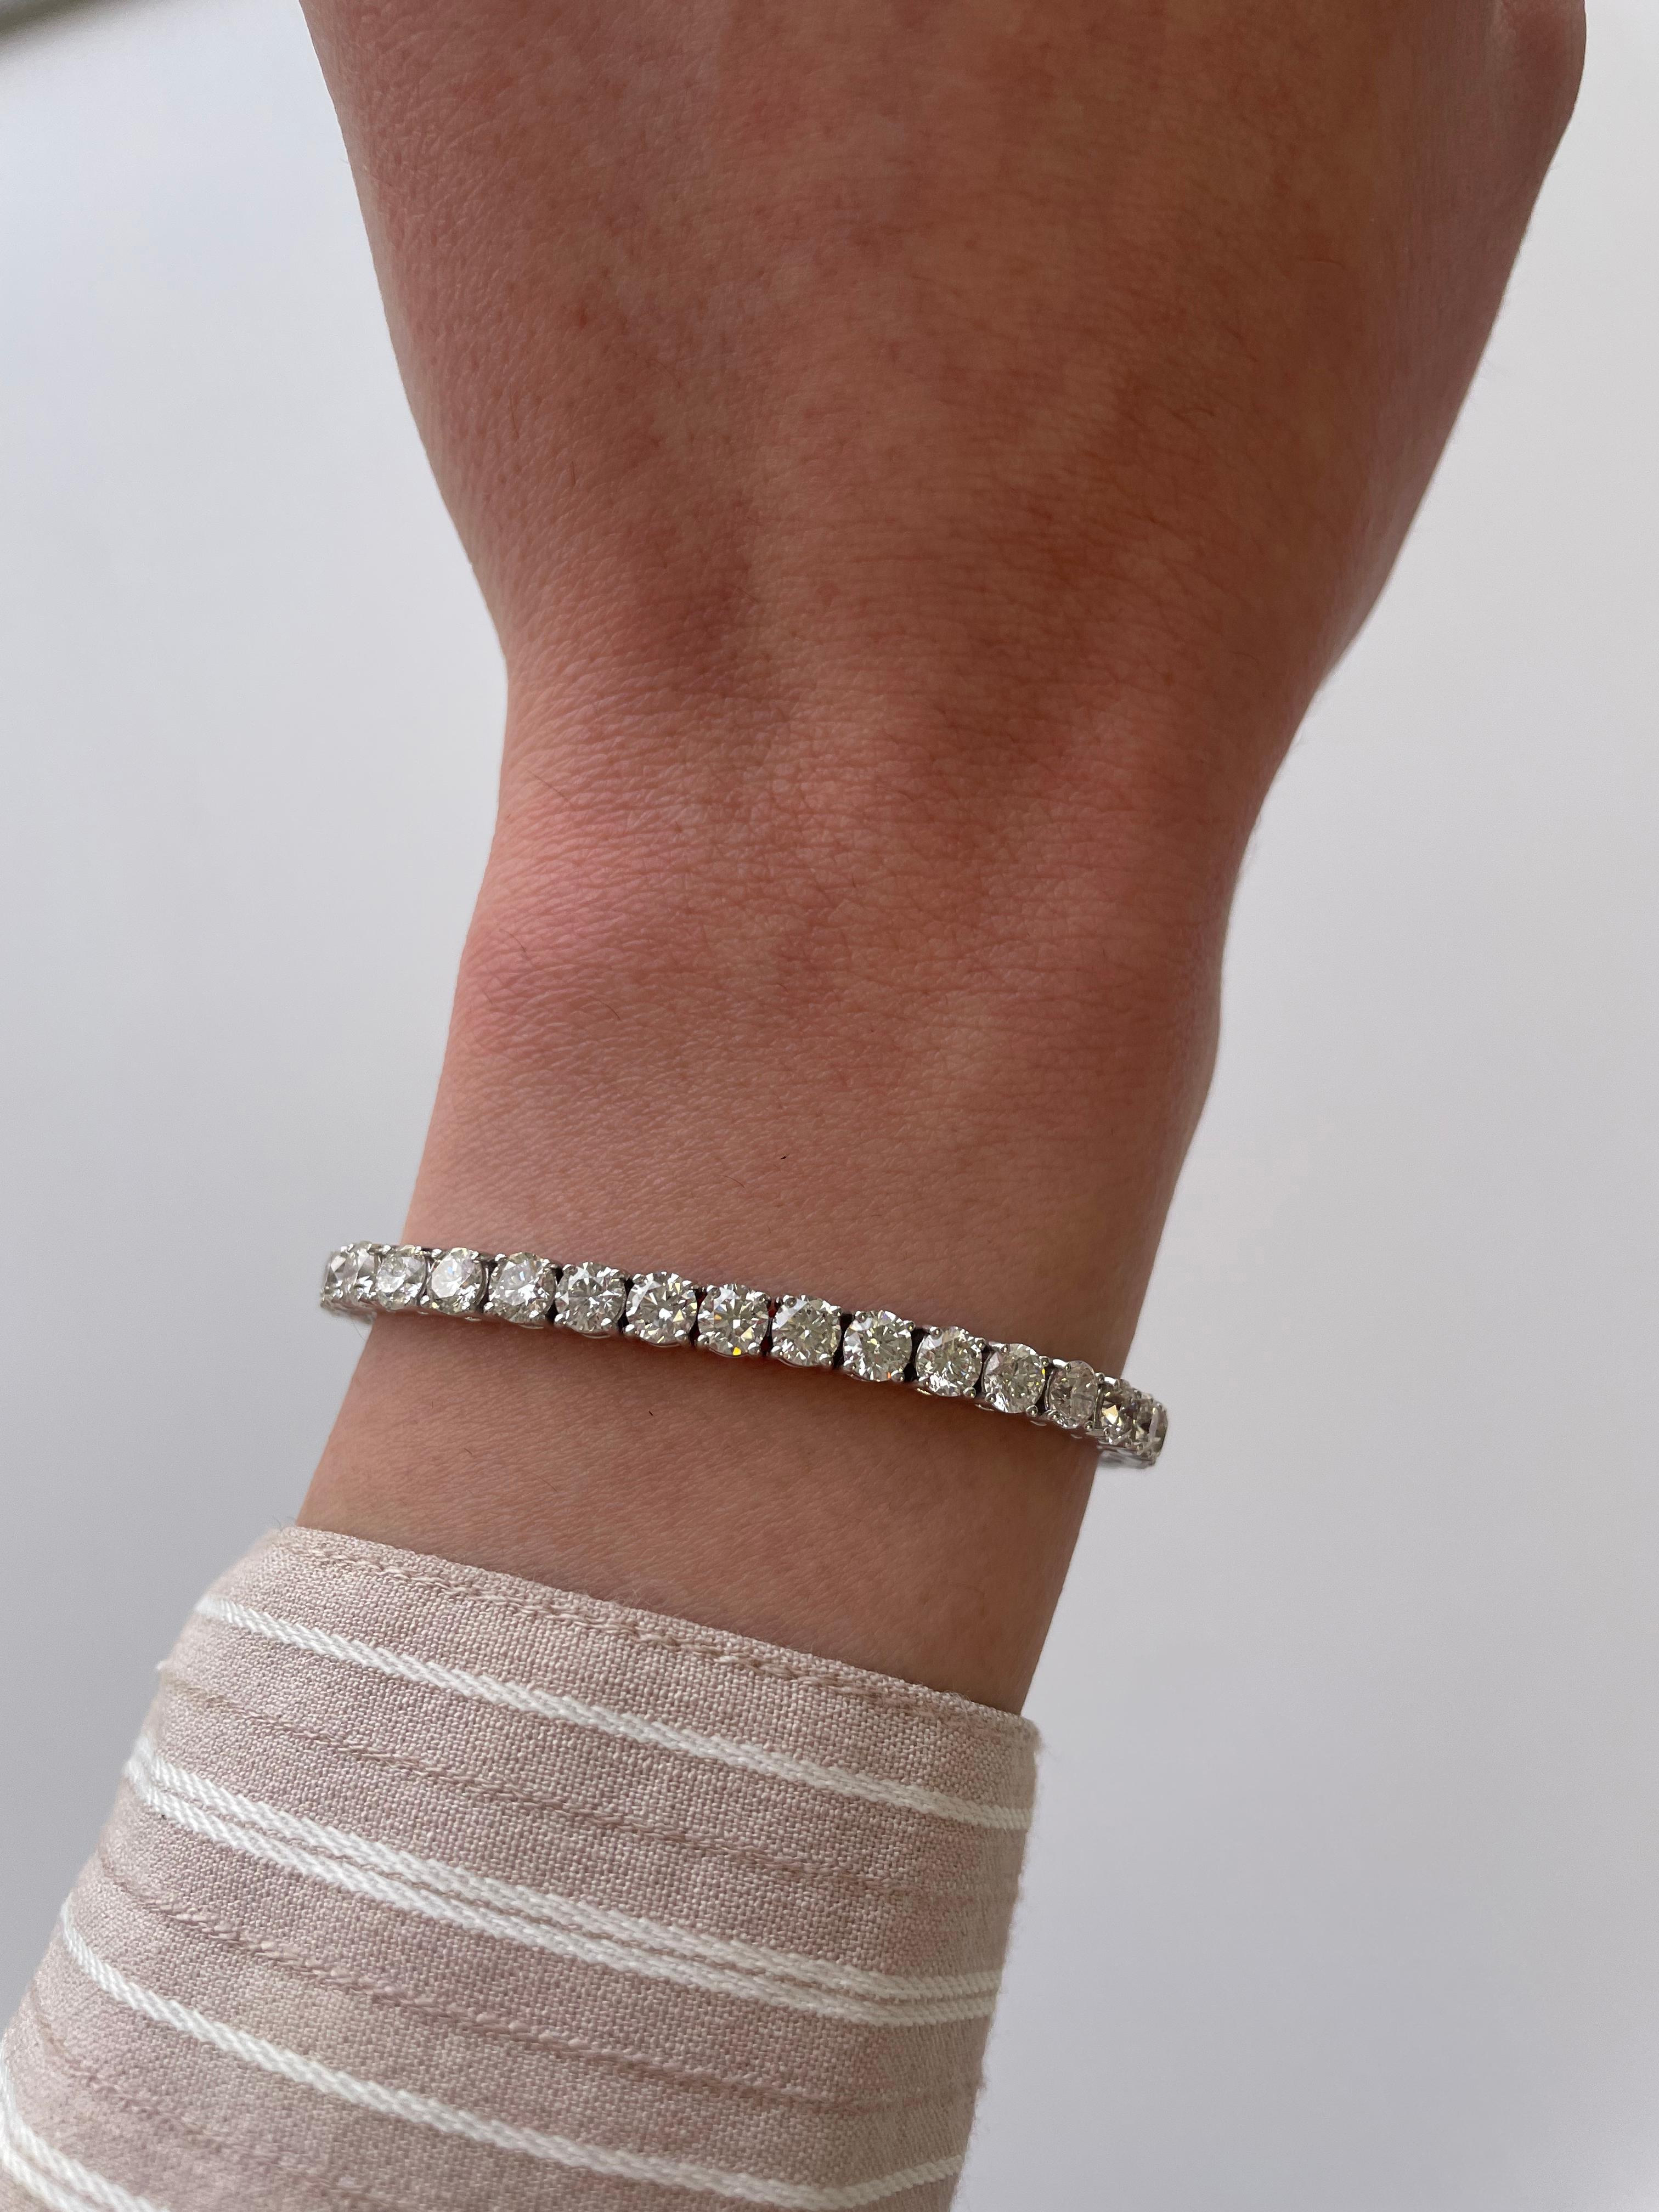 Exquisite and timeless diamonds tennis bracelet, by Alexander Beverly Hills.
45 round brilliant diamonds, 11.03 carats. Approximately D-F color and SI clarity. Four prong set in 18k white gold, 9.76 grams, 7 inches. 
Accommodated with an up-to-date